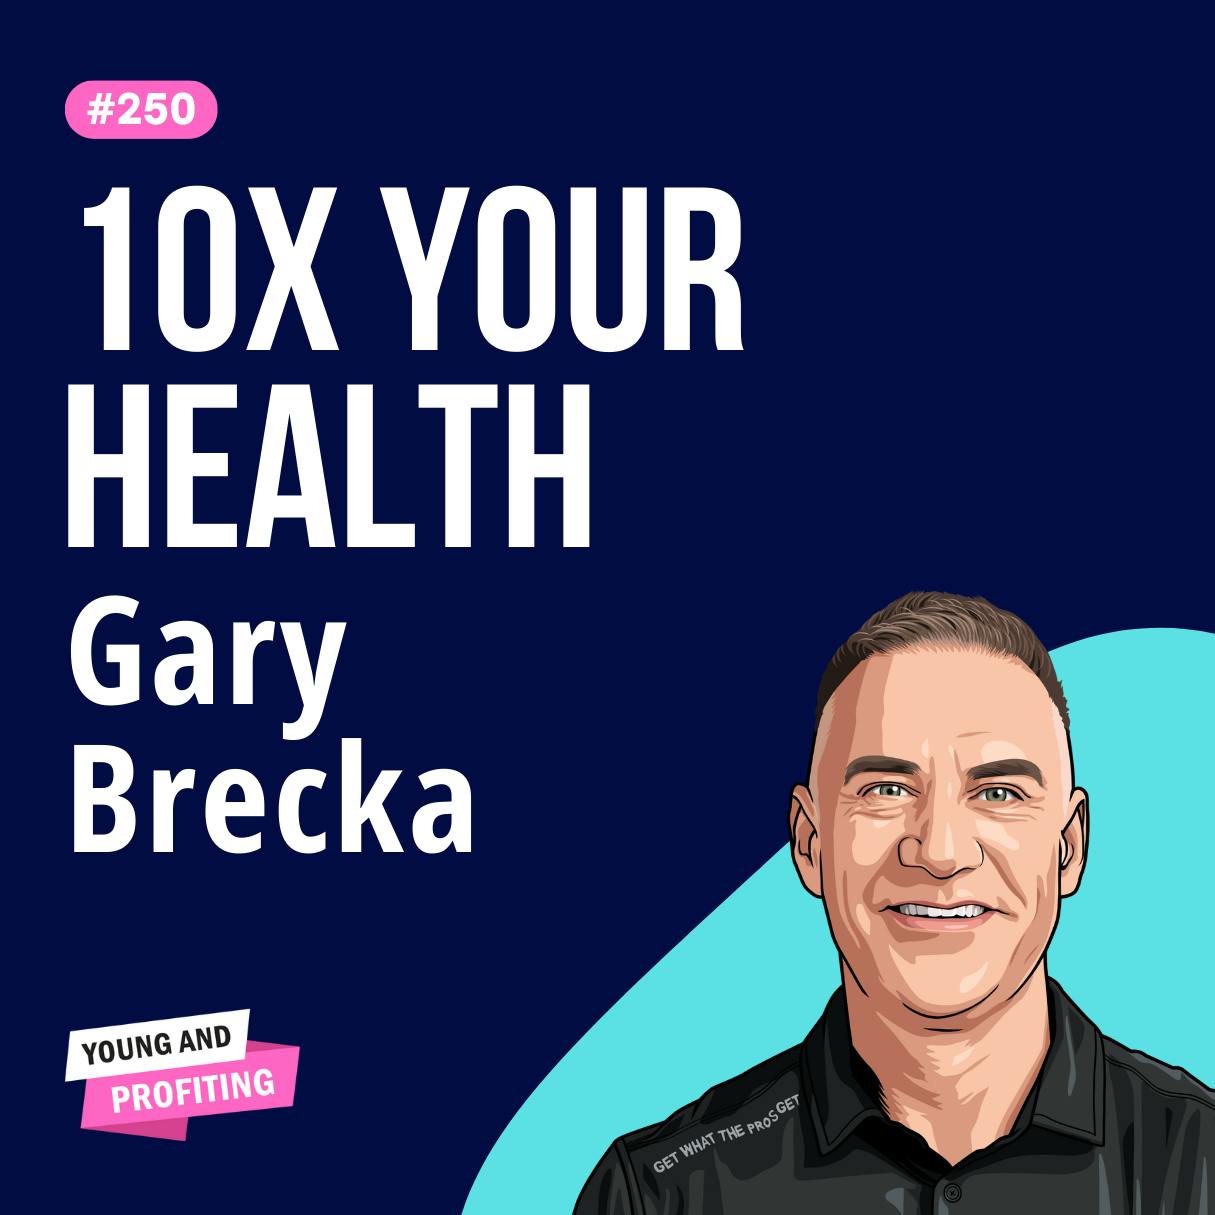 Gary Brecka: I Can Predict How Long You Have Left to Live! 10X Your Health With These 3 No-Cost Bio Hacks | E250